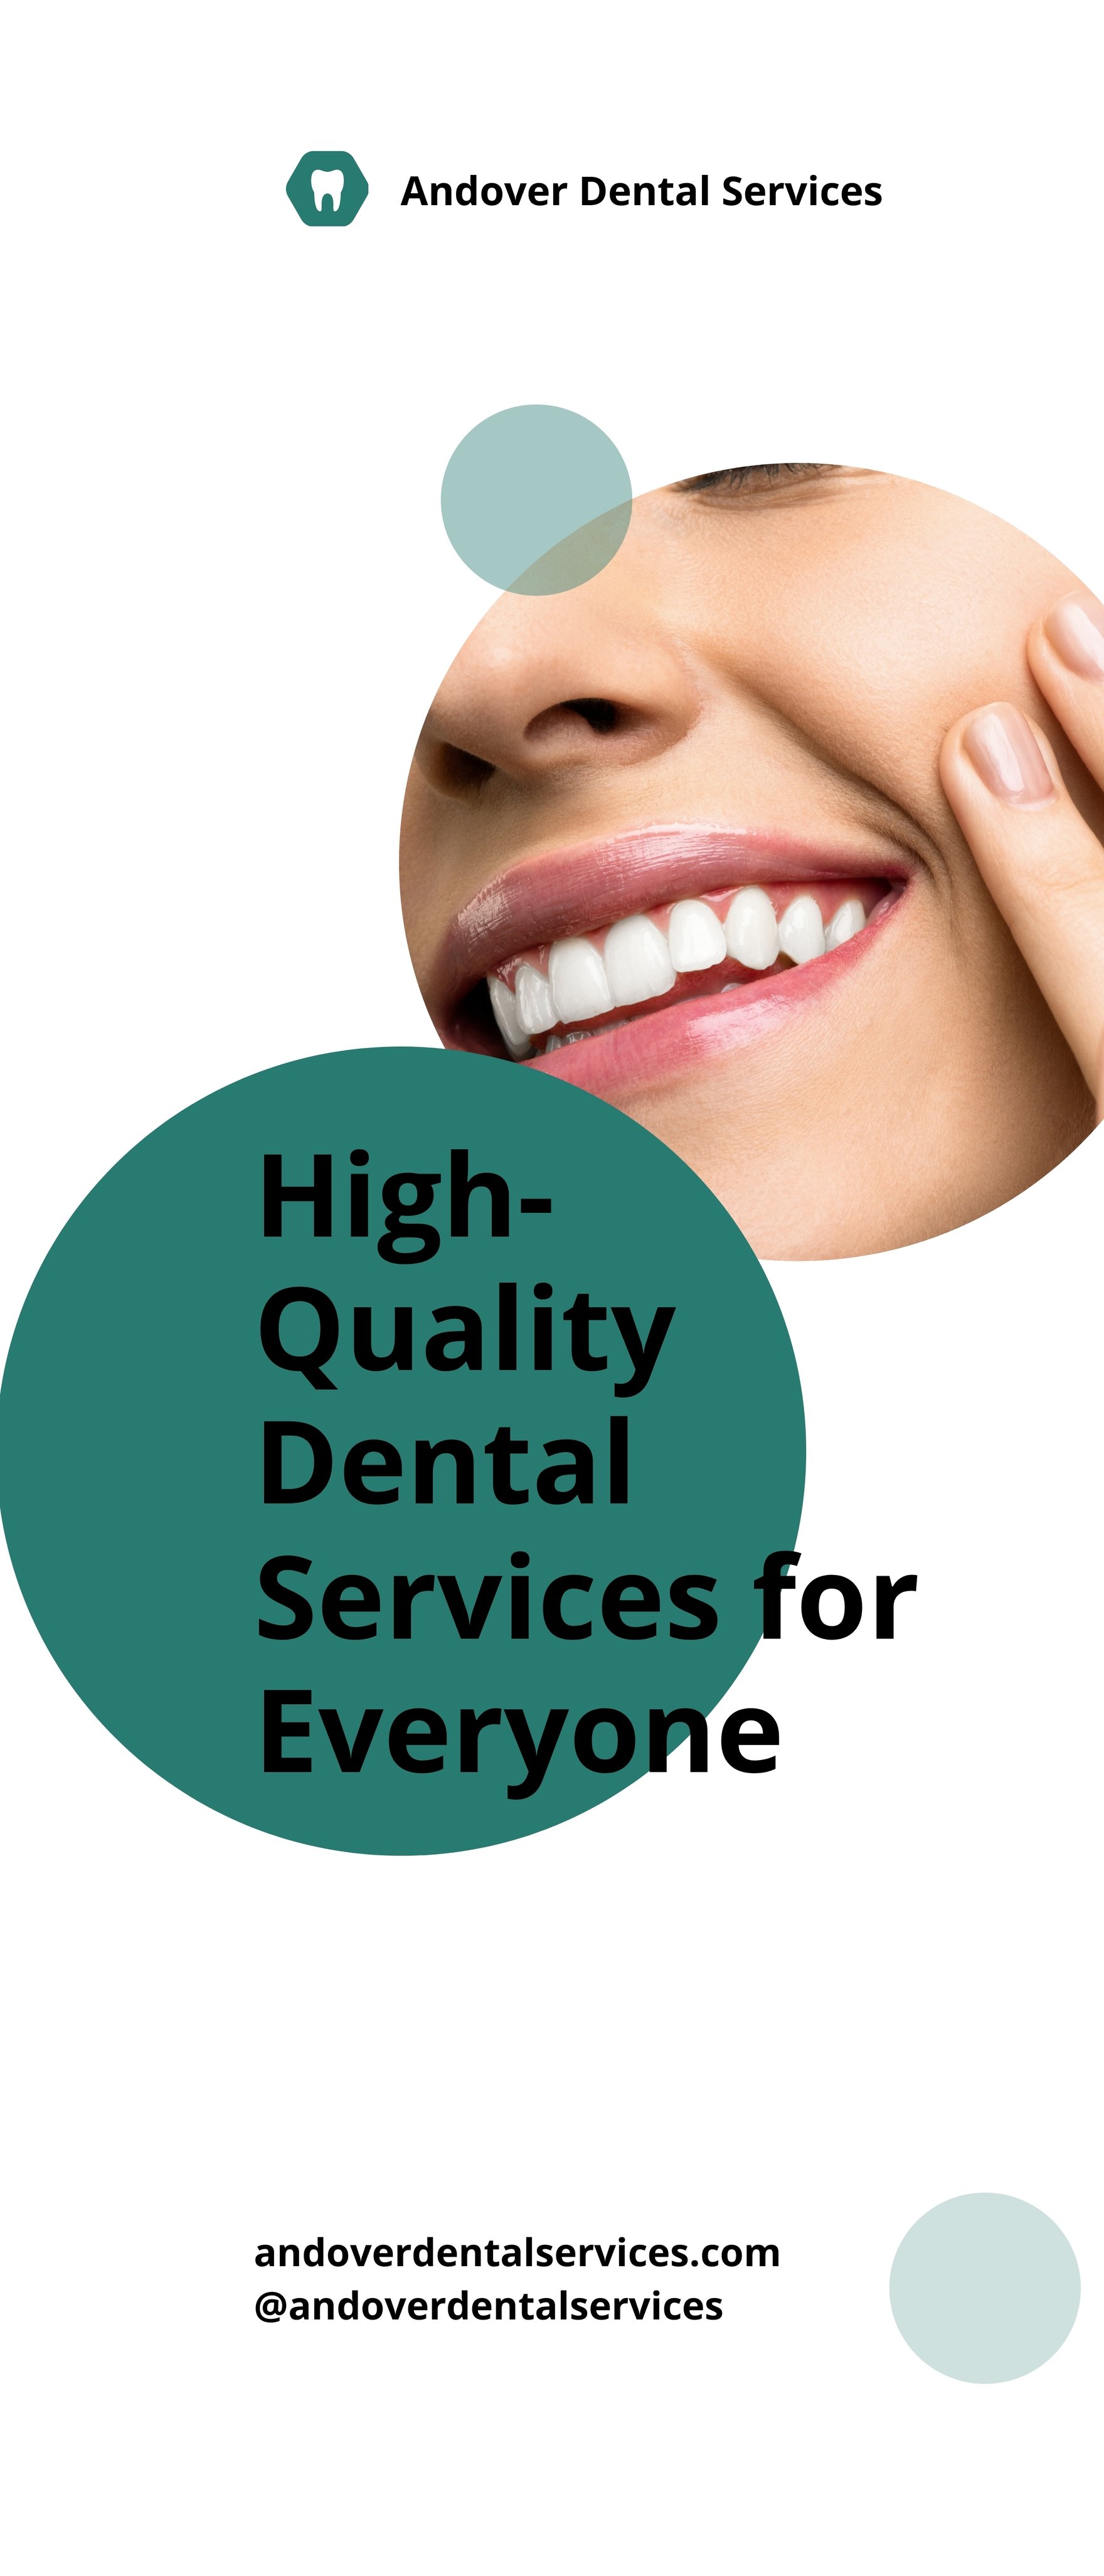 Free Medical Dental Service Roll Up Banner Template